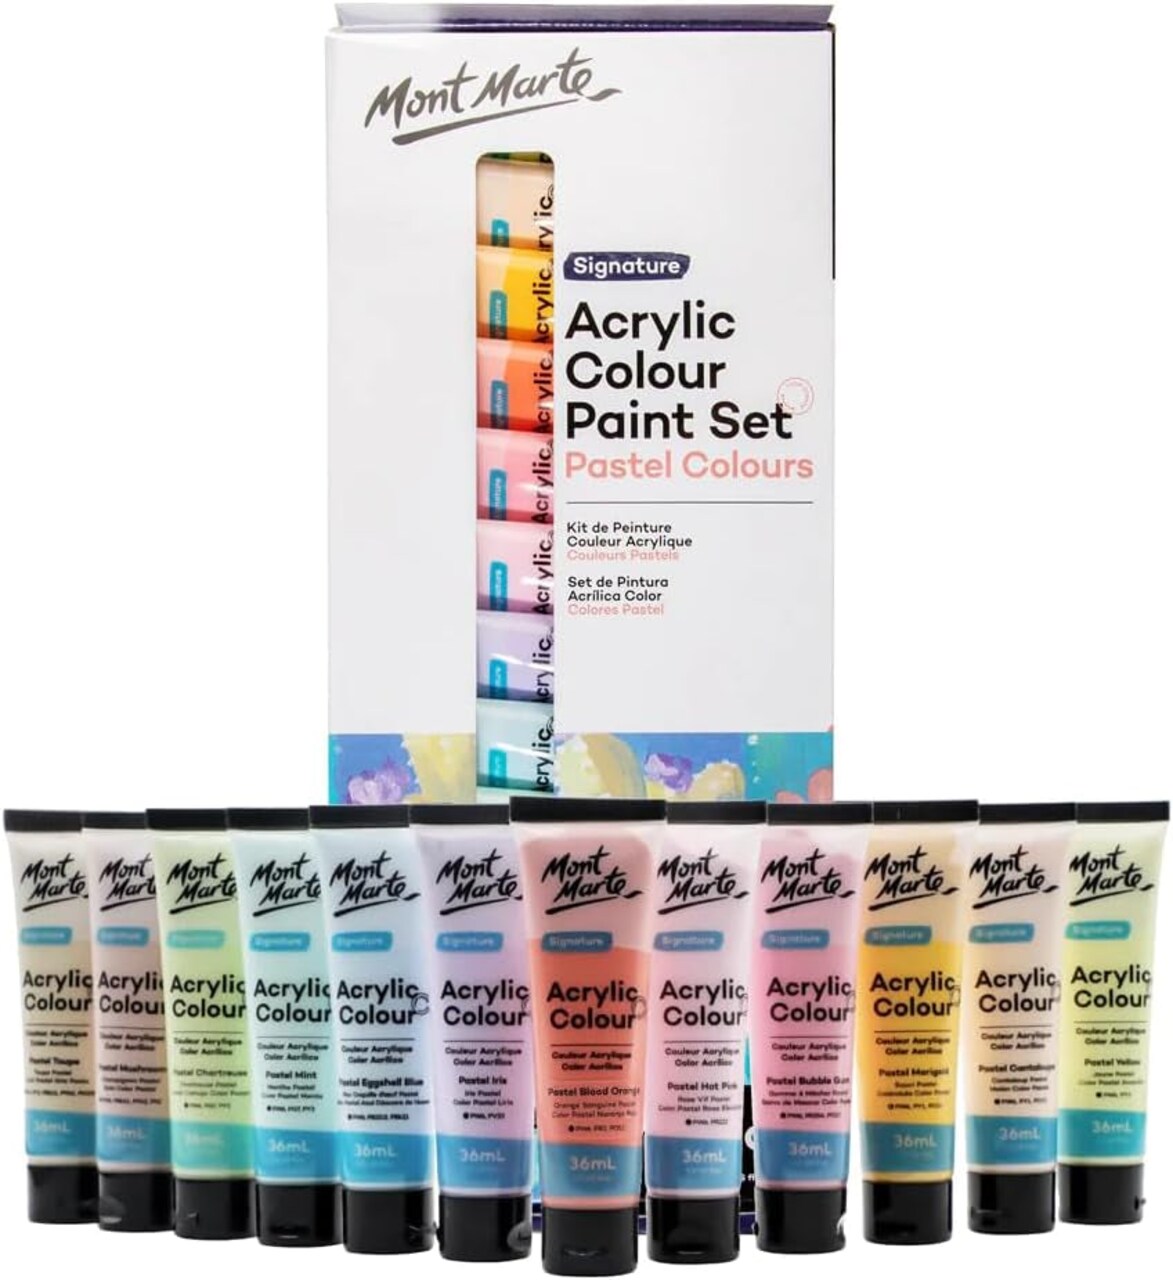 Acrylic Colour Pastel Paint Set Signature, Creamy Pastel Acrylic Paint Set,  Good Coverage, Semi-Matte Finish, Ideal for Most Art and Craft Surfaces.